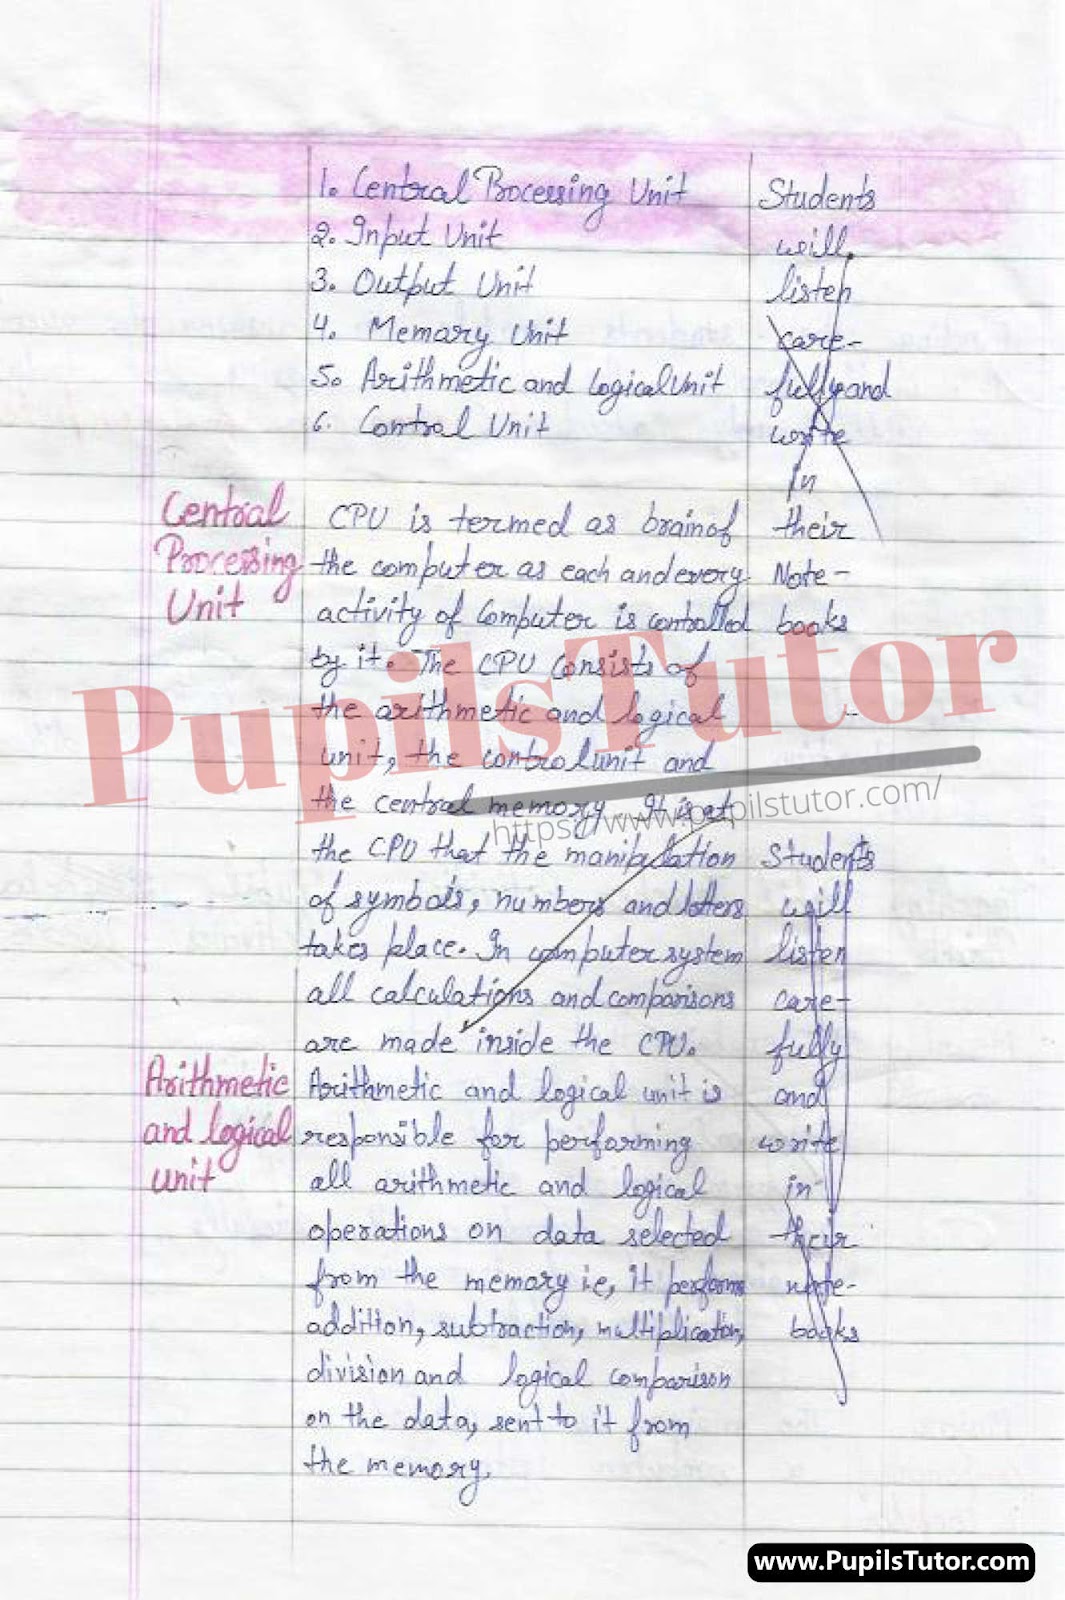 How To Make Computer Lesson Plan For Class 10 On Central Processing Unit (CPU) In English – [Page And Photo 4] – pupilstutor.com